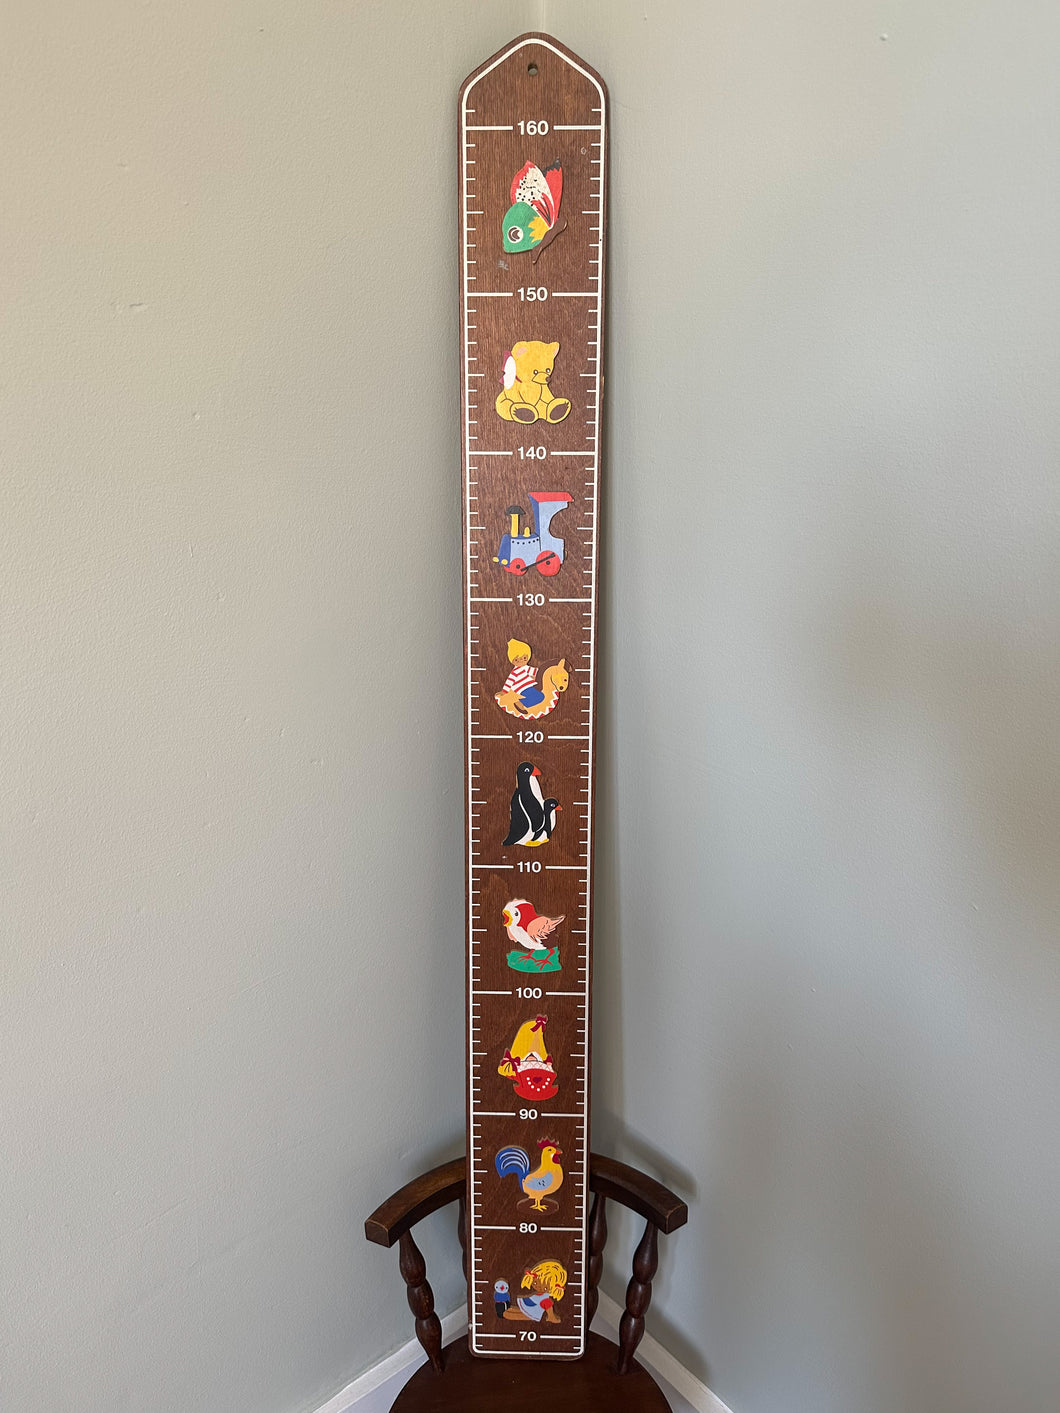 Vintage 1980s wooden German measuring stick or height chart,featuring a train, teddy bear and penguin, by Mertens Kunst - Moppet